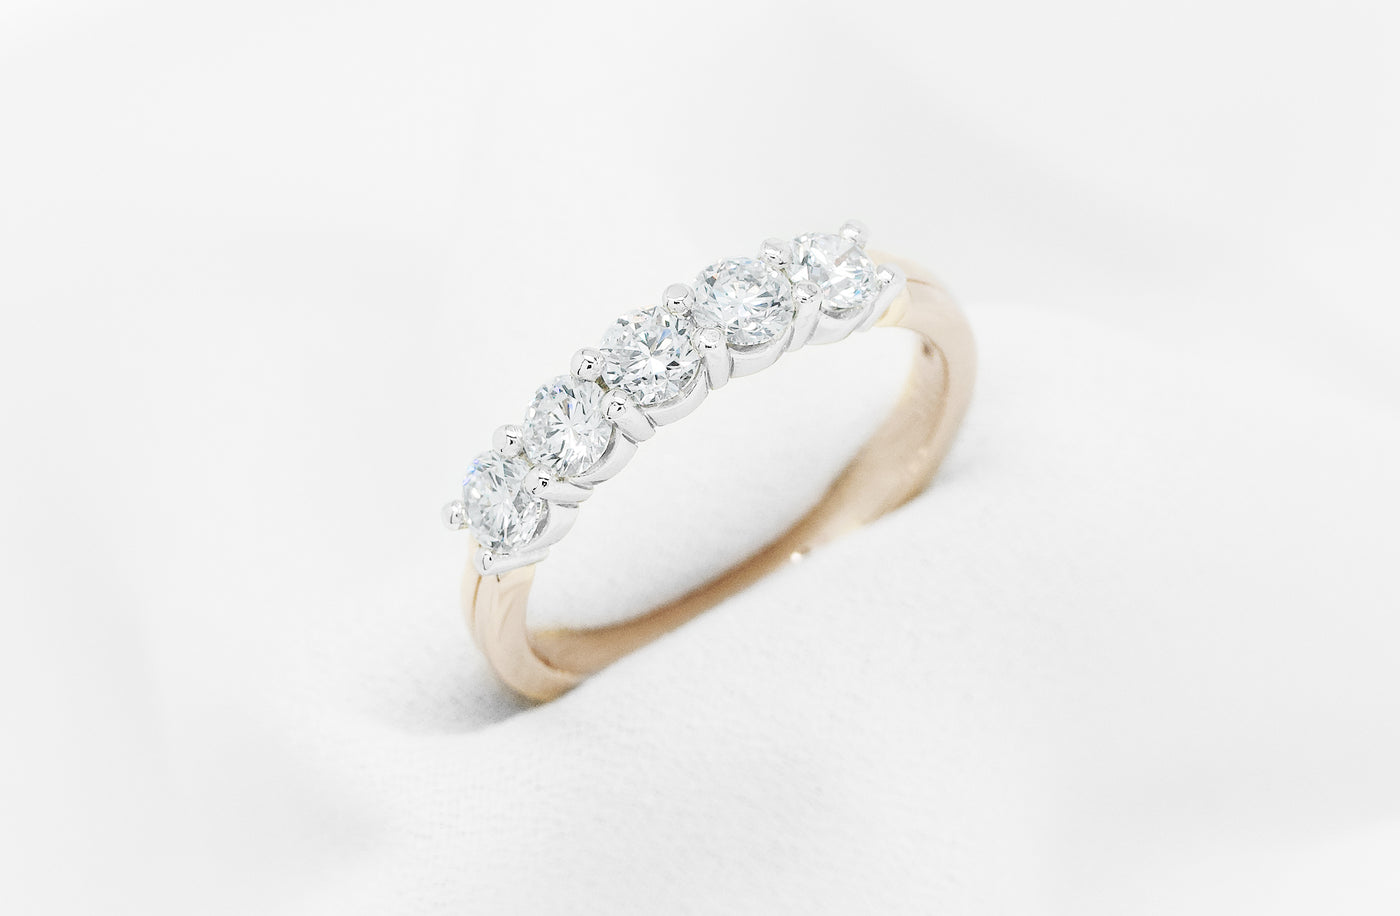 Diamond eternity ring, five 0.80ct round diamonds, D, G, colour, color, VS-SI clarity, Diamond 18ct Rose Gold band, Platinum setting, Five Stone, Narrative Collection Ring, Size N, ready to ship, ready to go, jewellery, jewelry